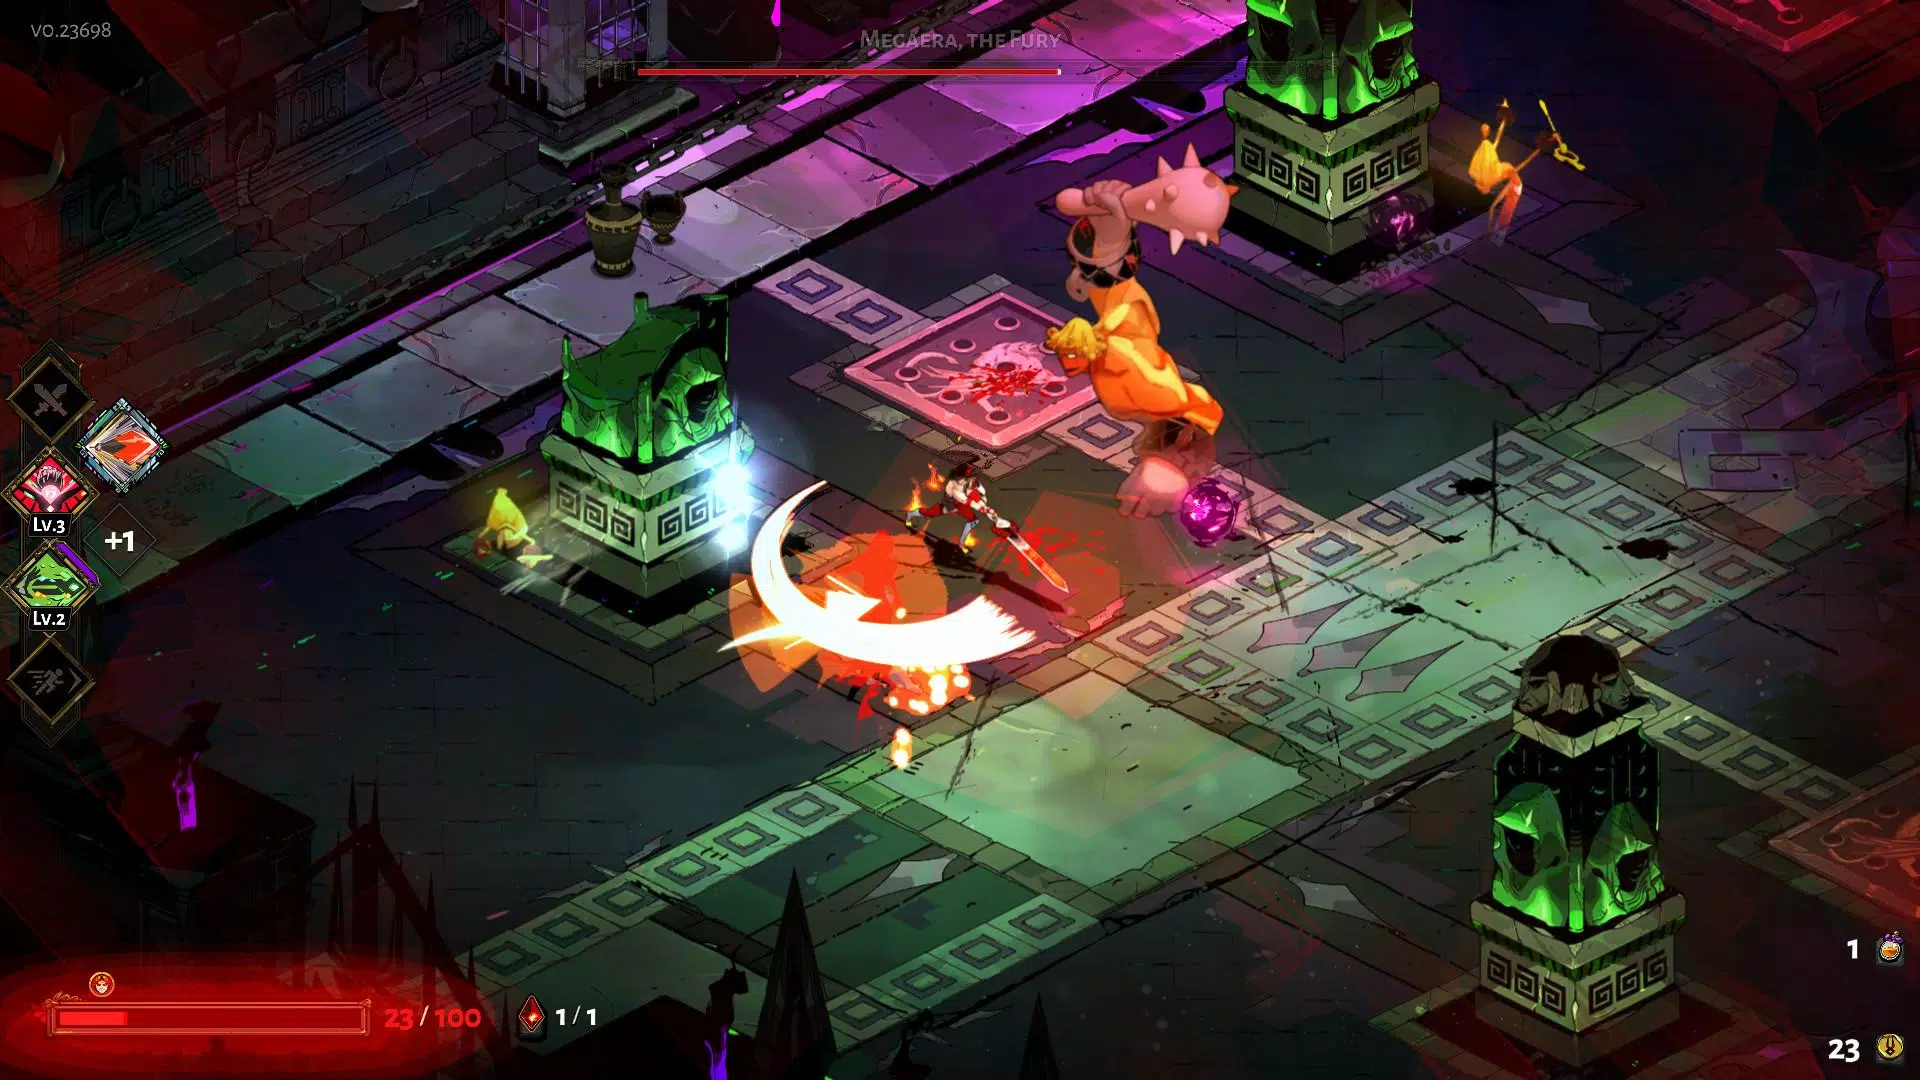 Hades mobile APK (Android Game) - Free Download